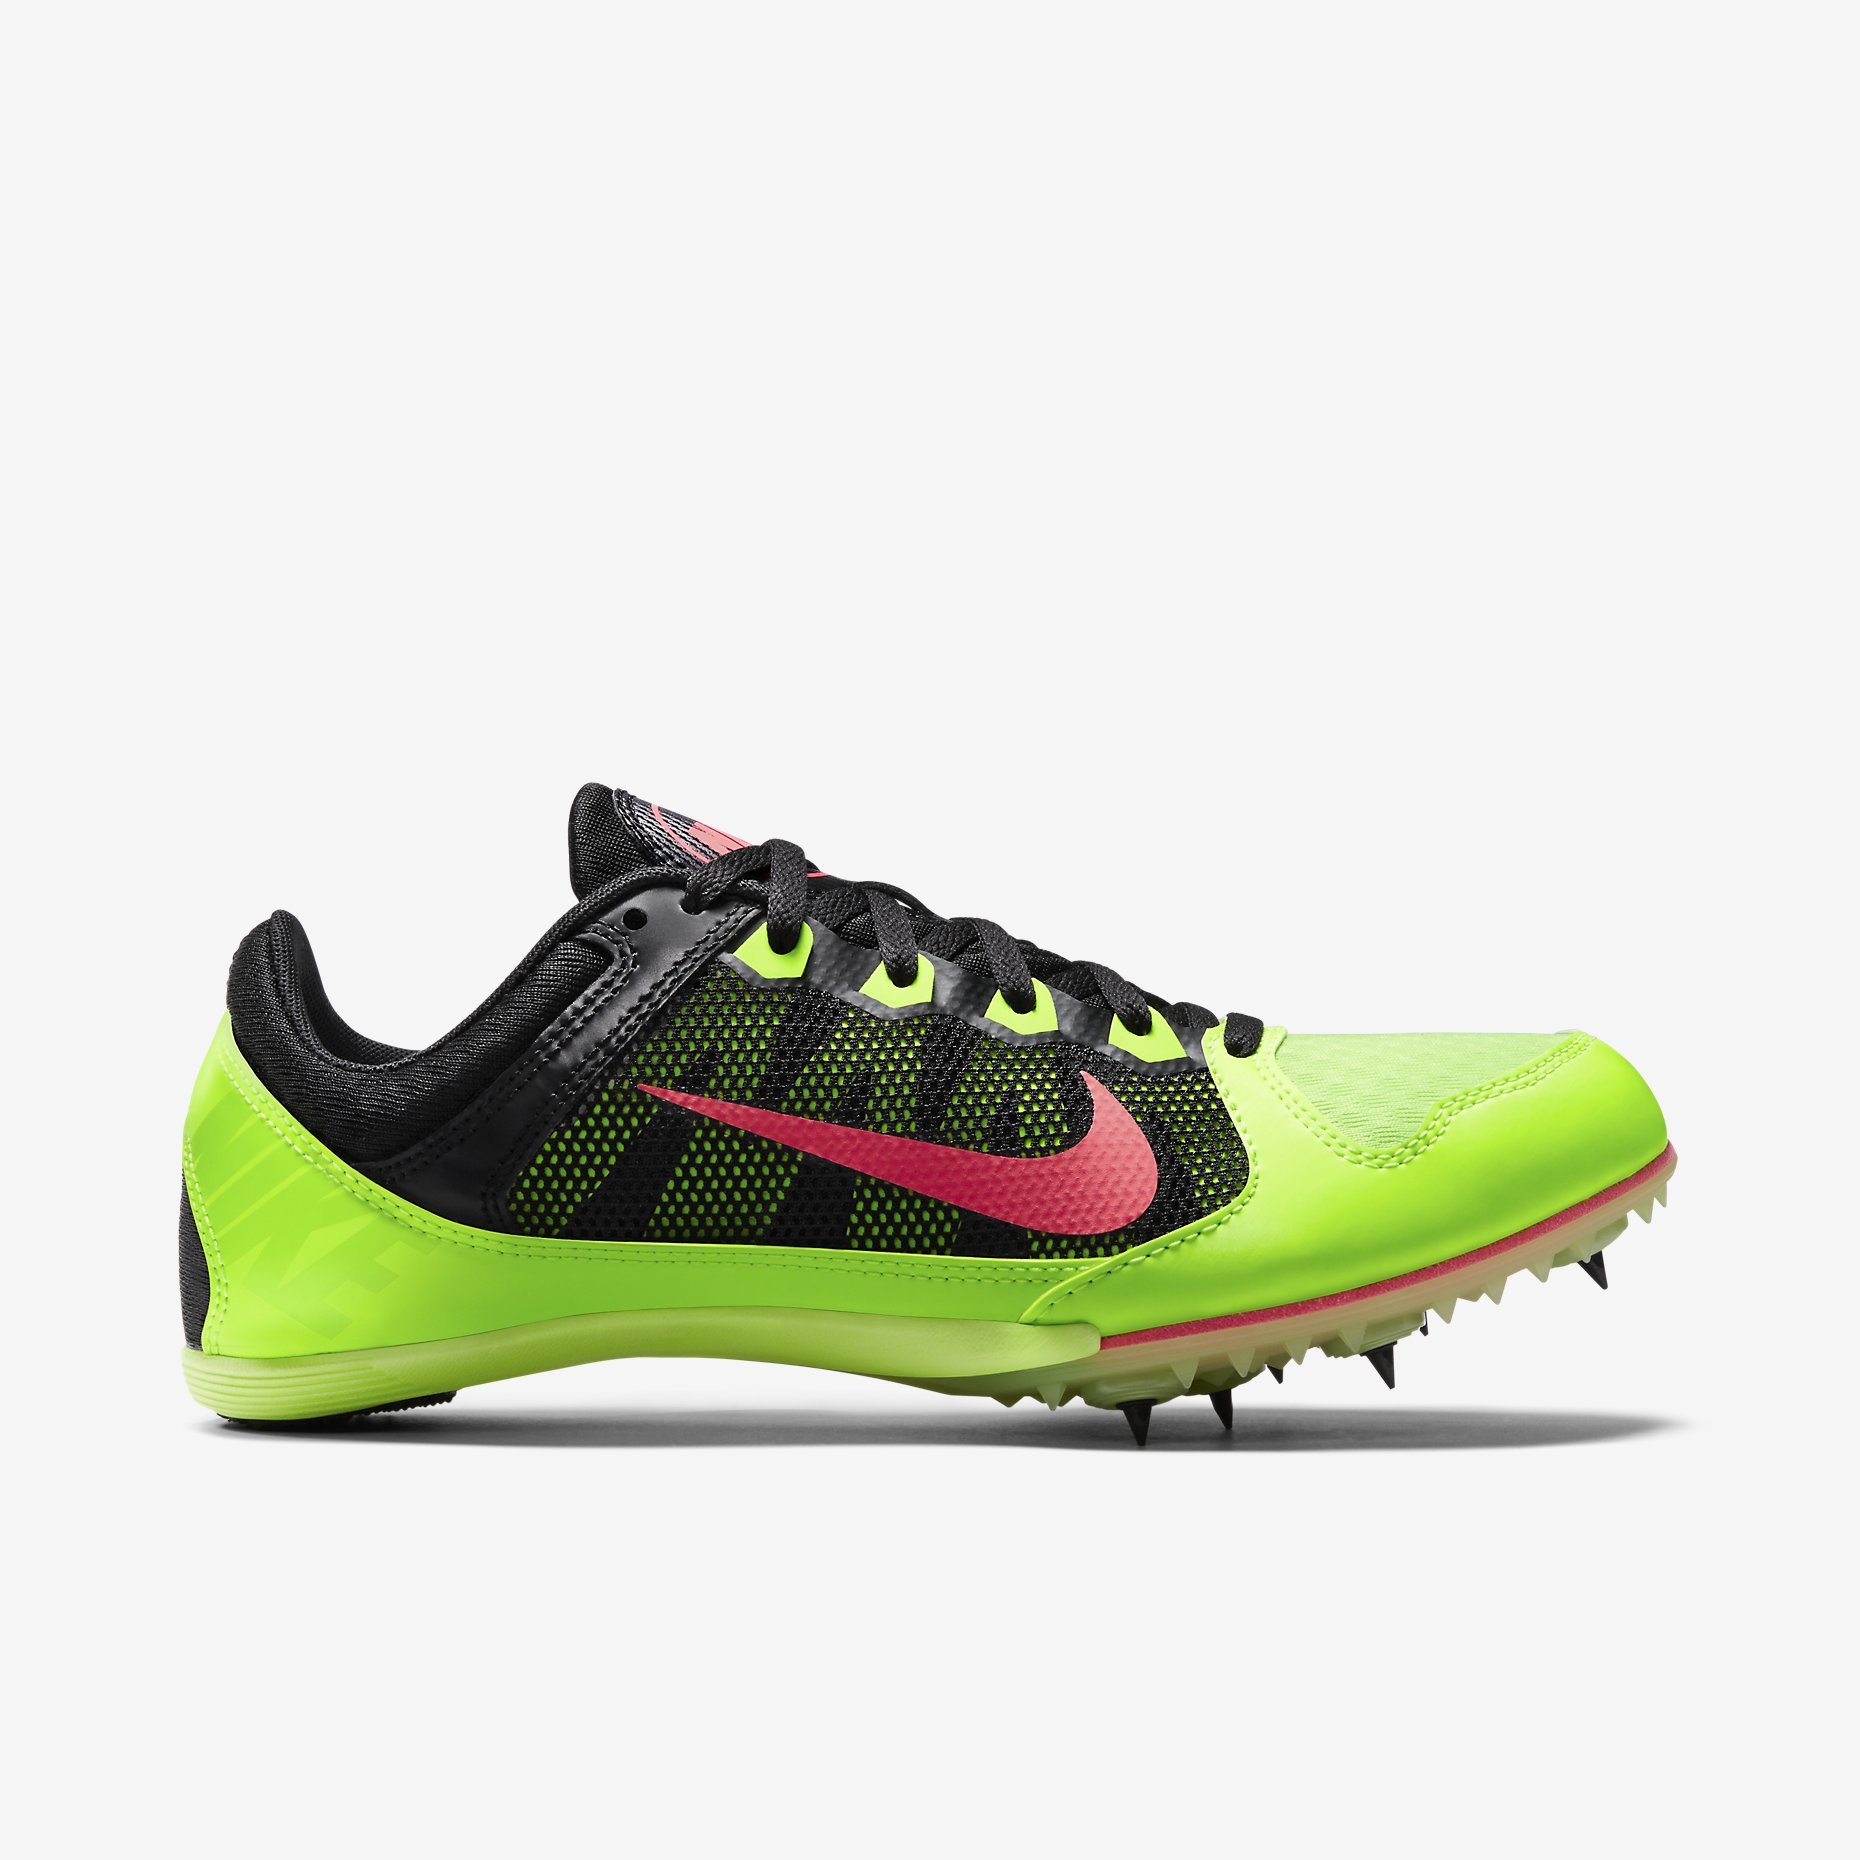 nike rival md 7